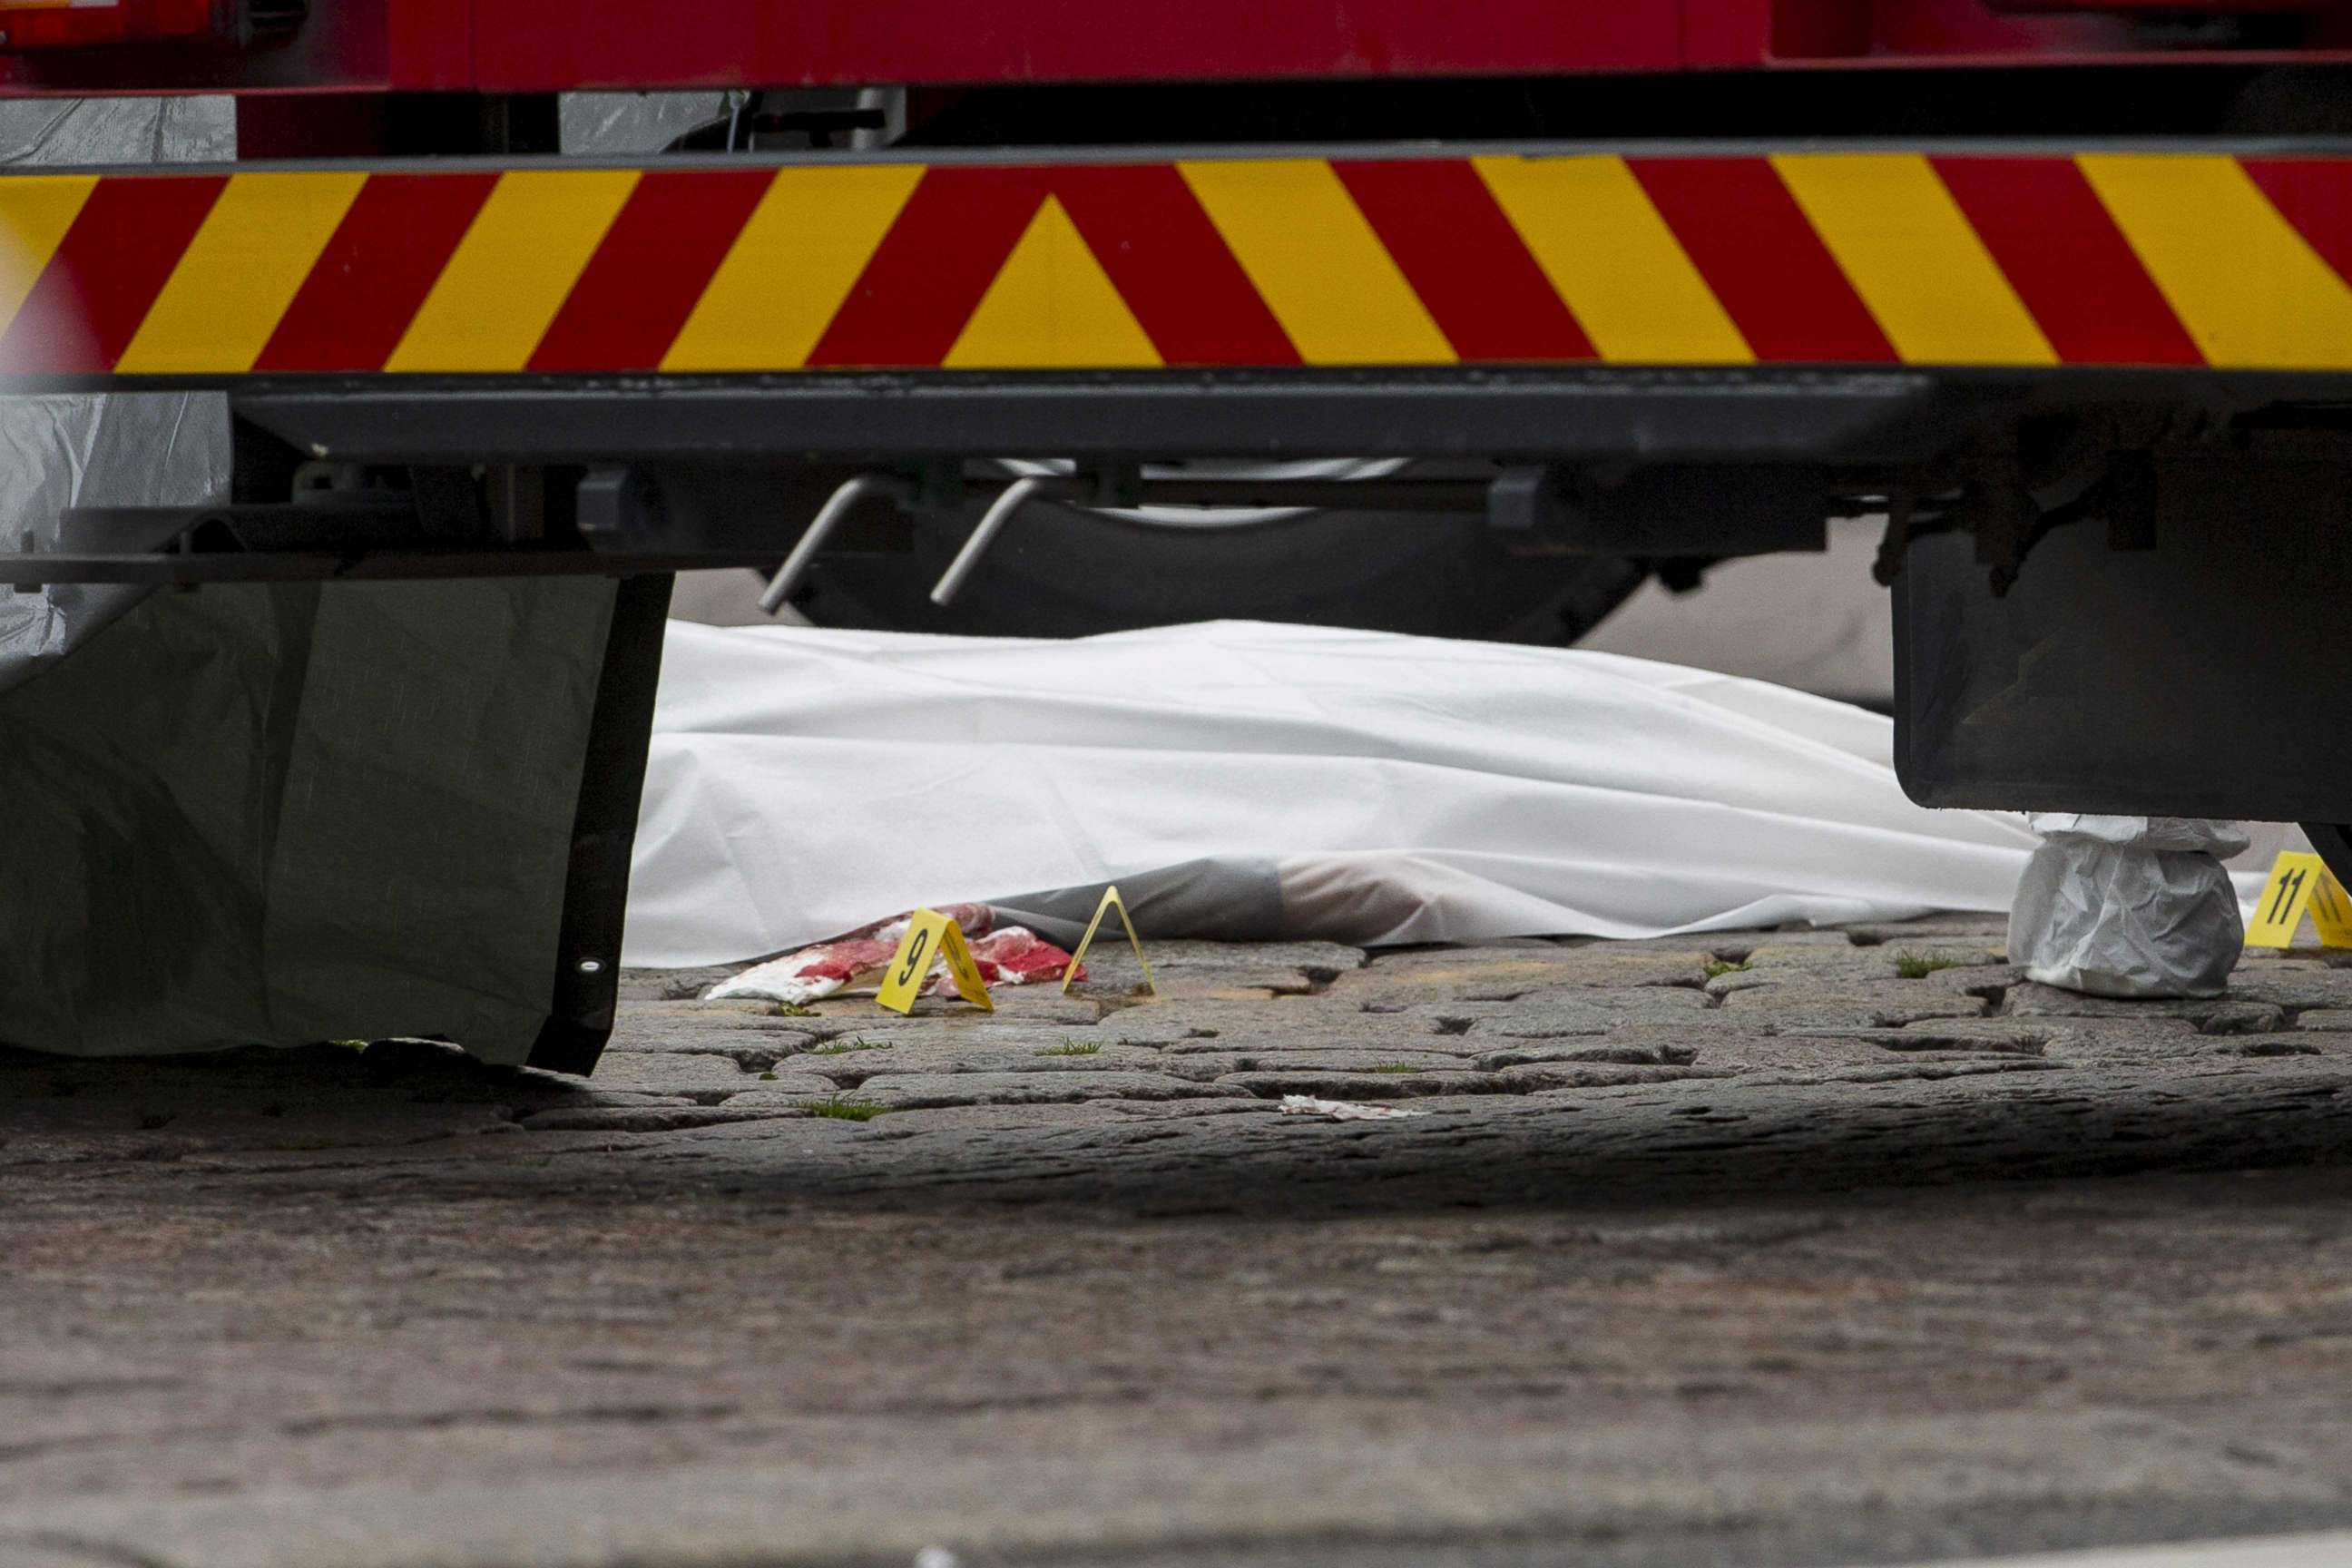 PHOTO: A stabbing victim's body lies covered in a sheet at the Turku Market Square in the Finnish city of Turku where several people were stabbed on Aug. 18, 2017.